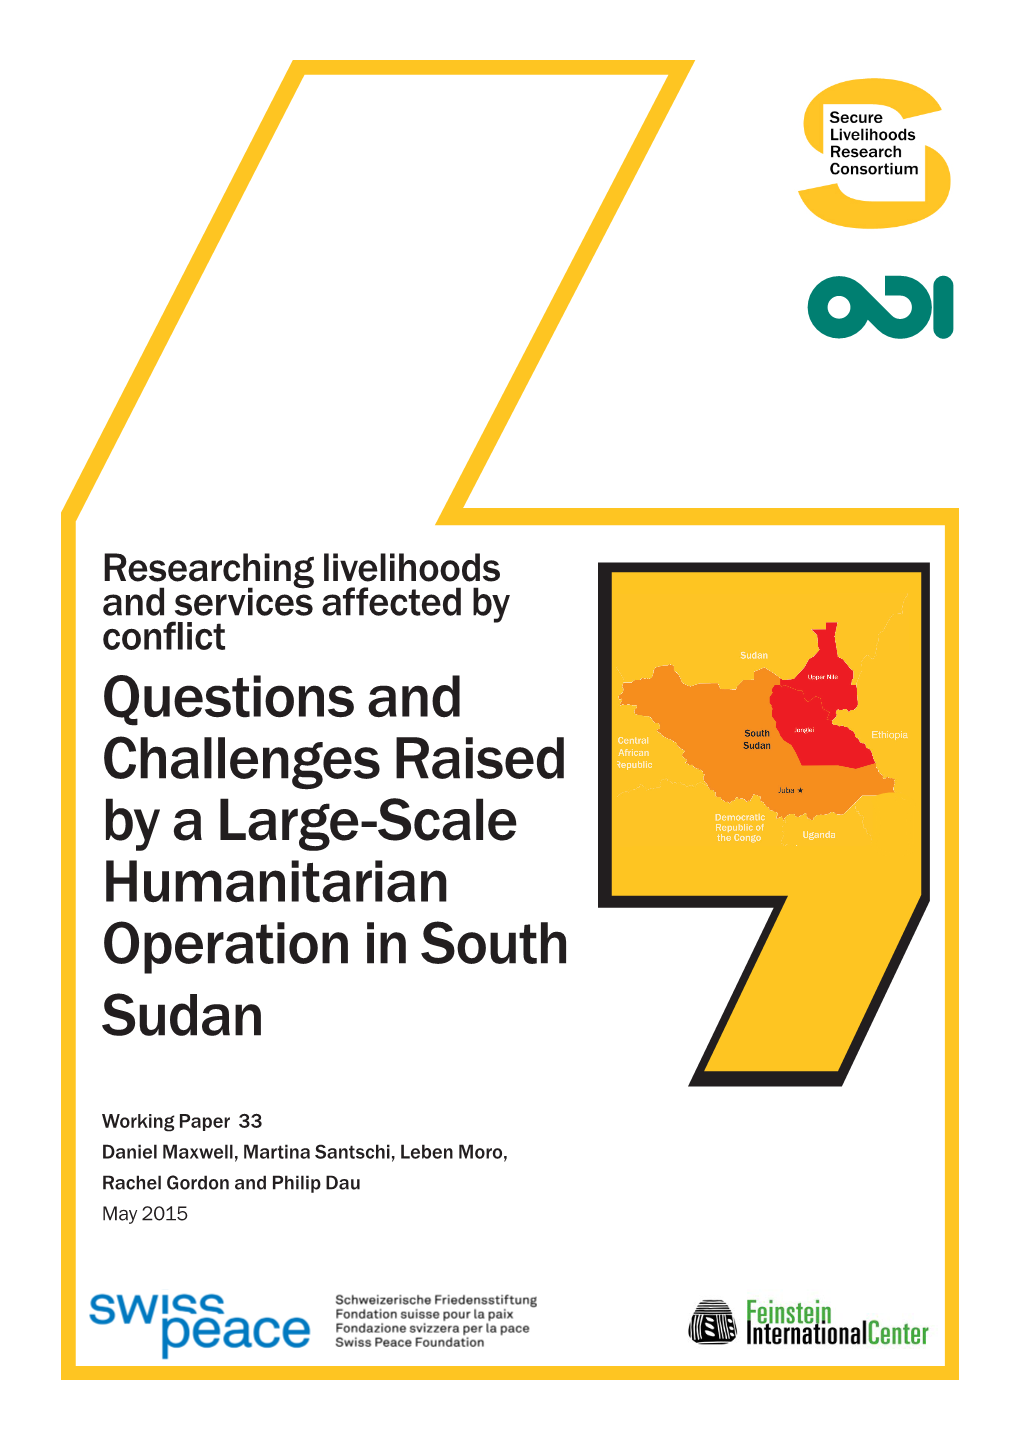 Questions and Challenges Raised by a Large-Scale Humanitarian Operation in South Sudan